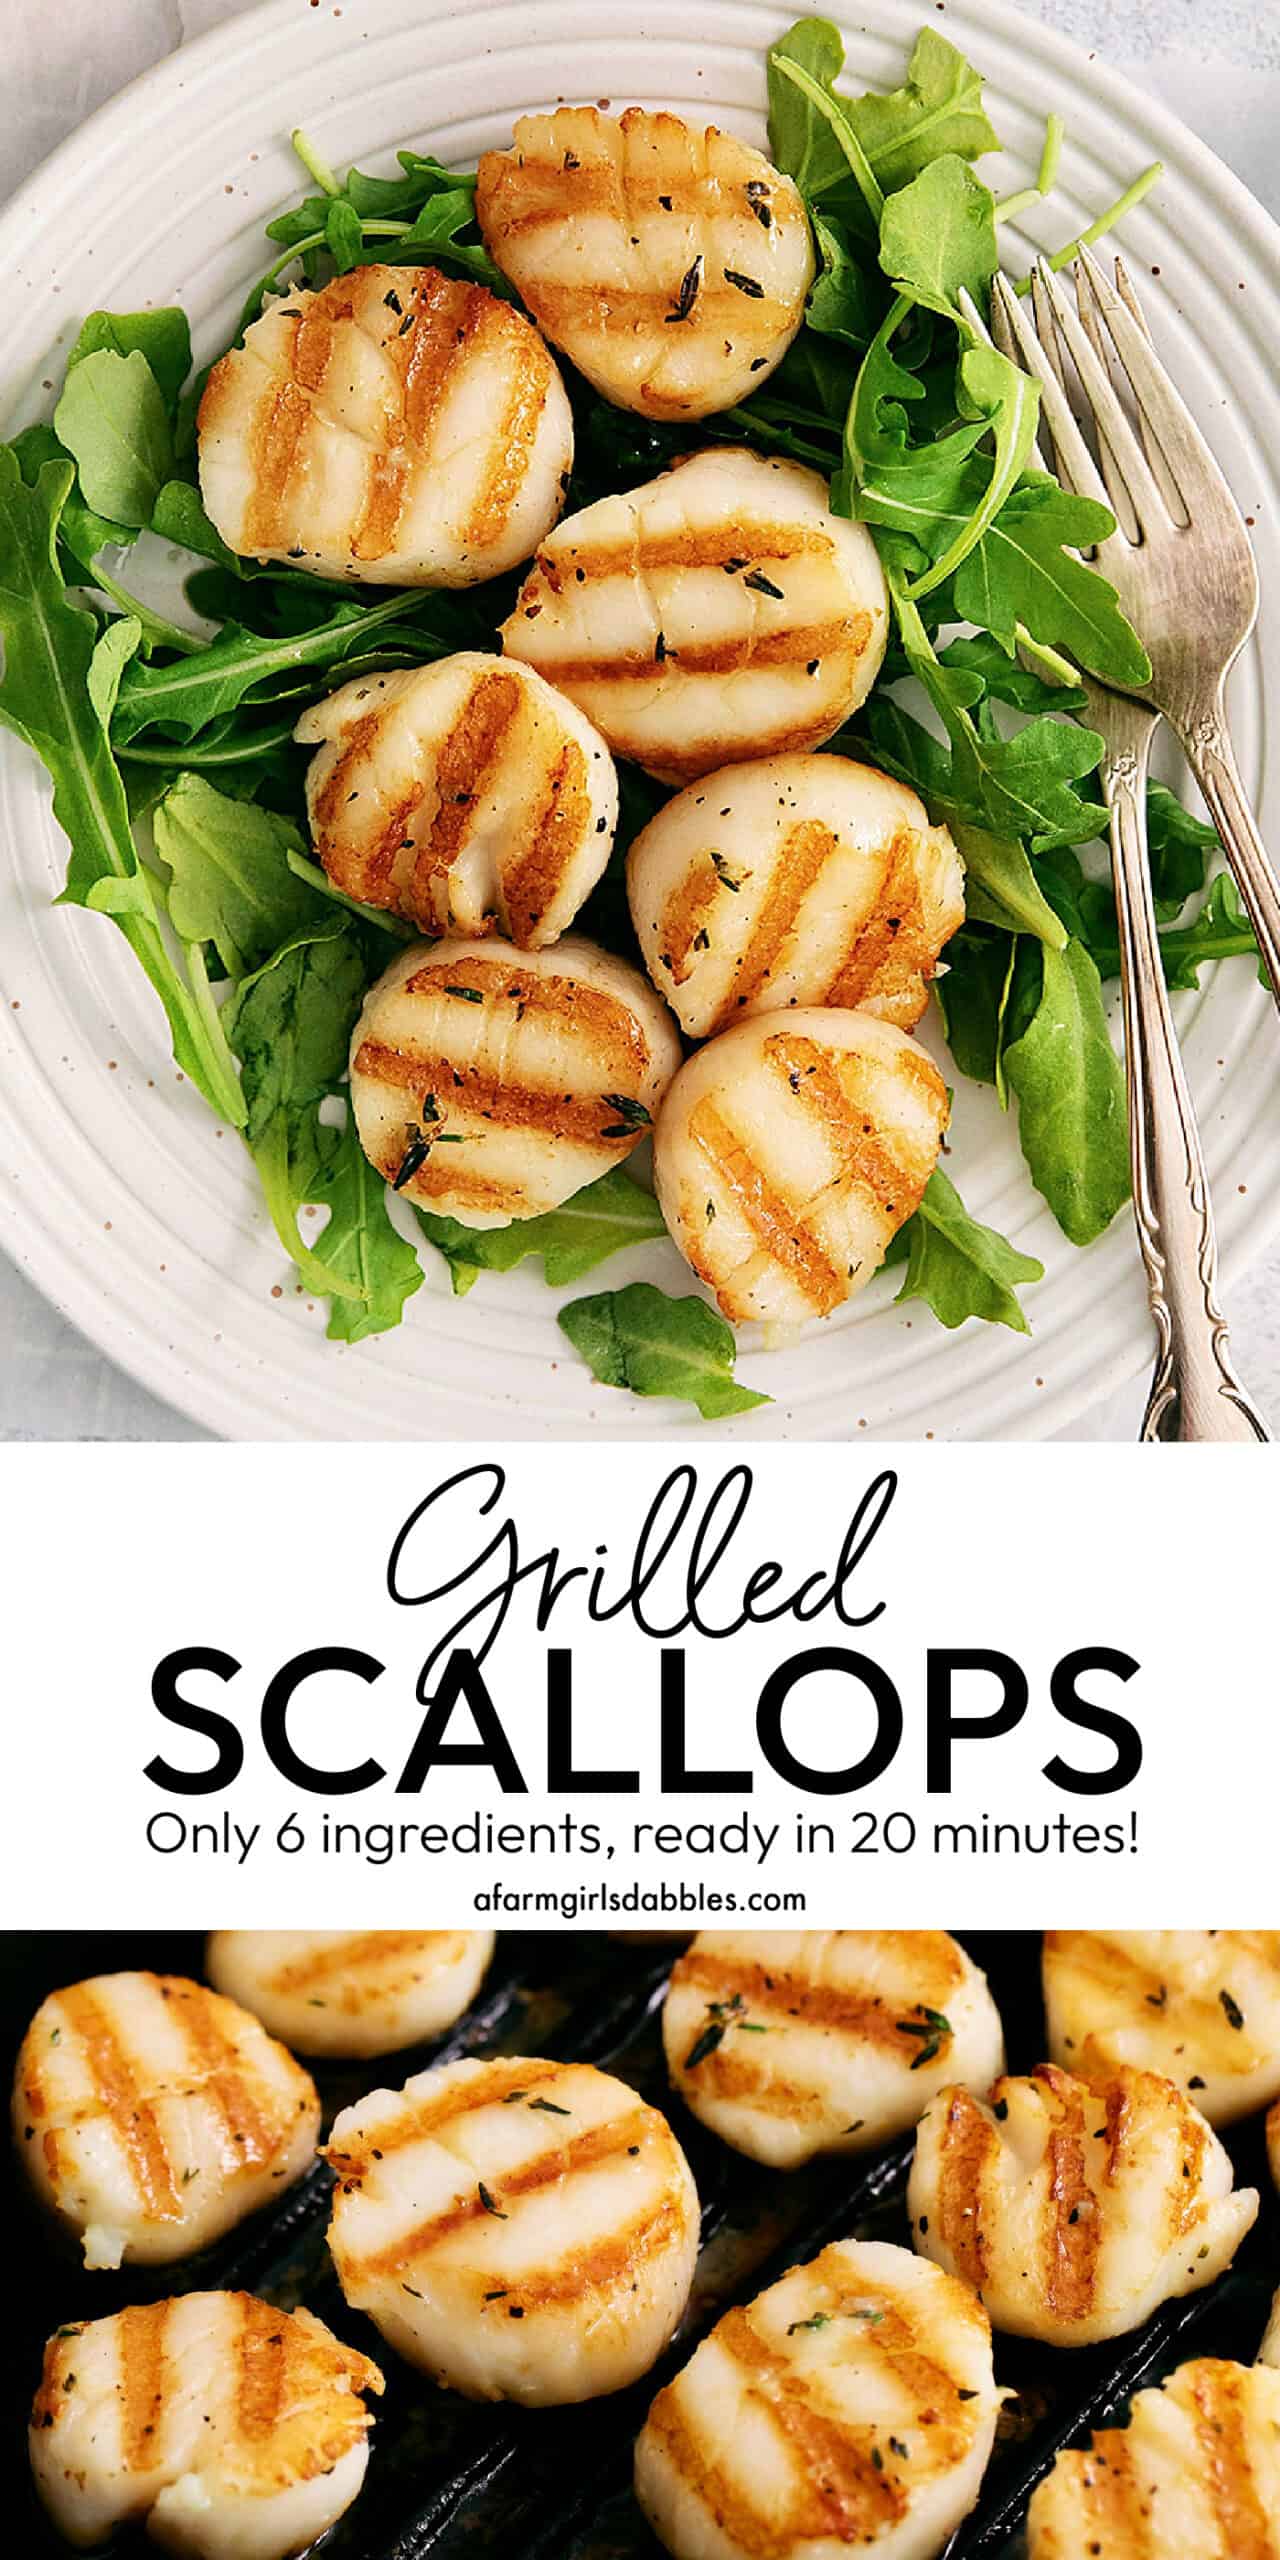 Pinterest image for grilled scallops